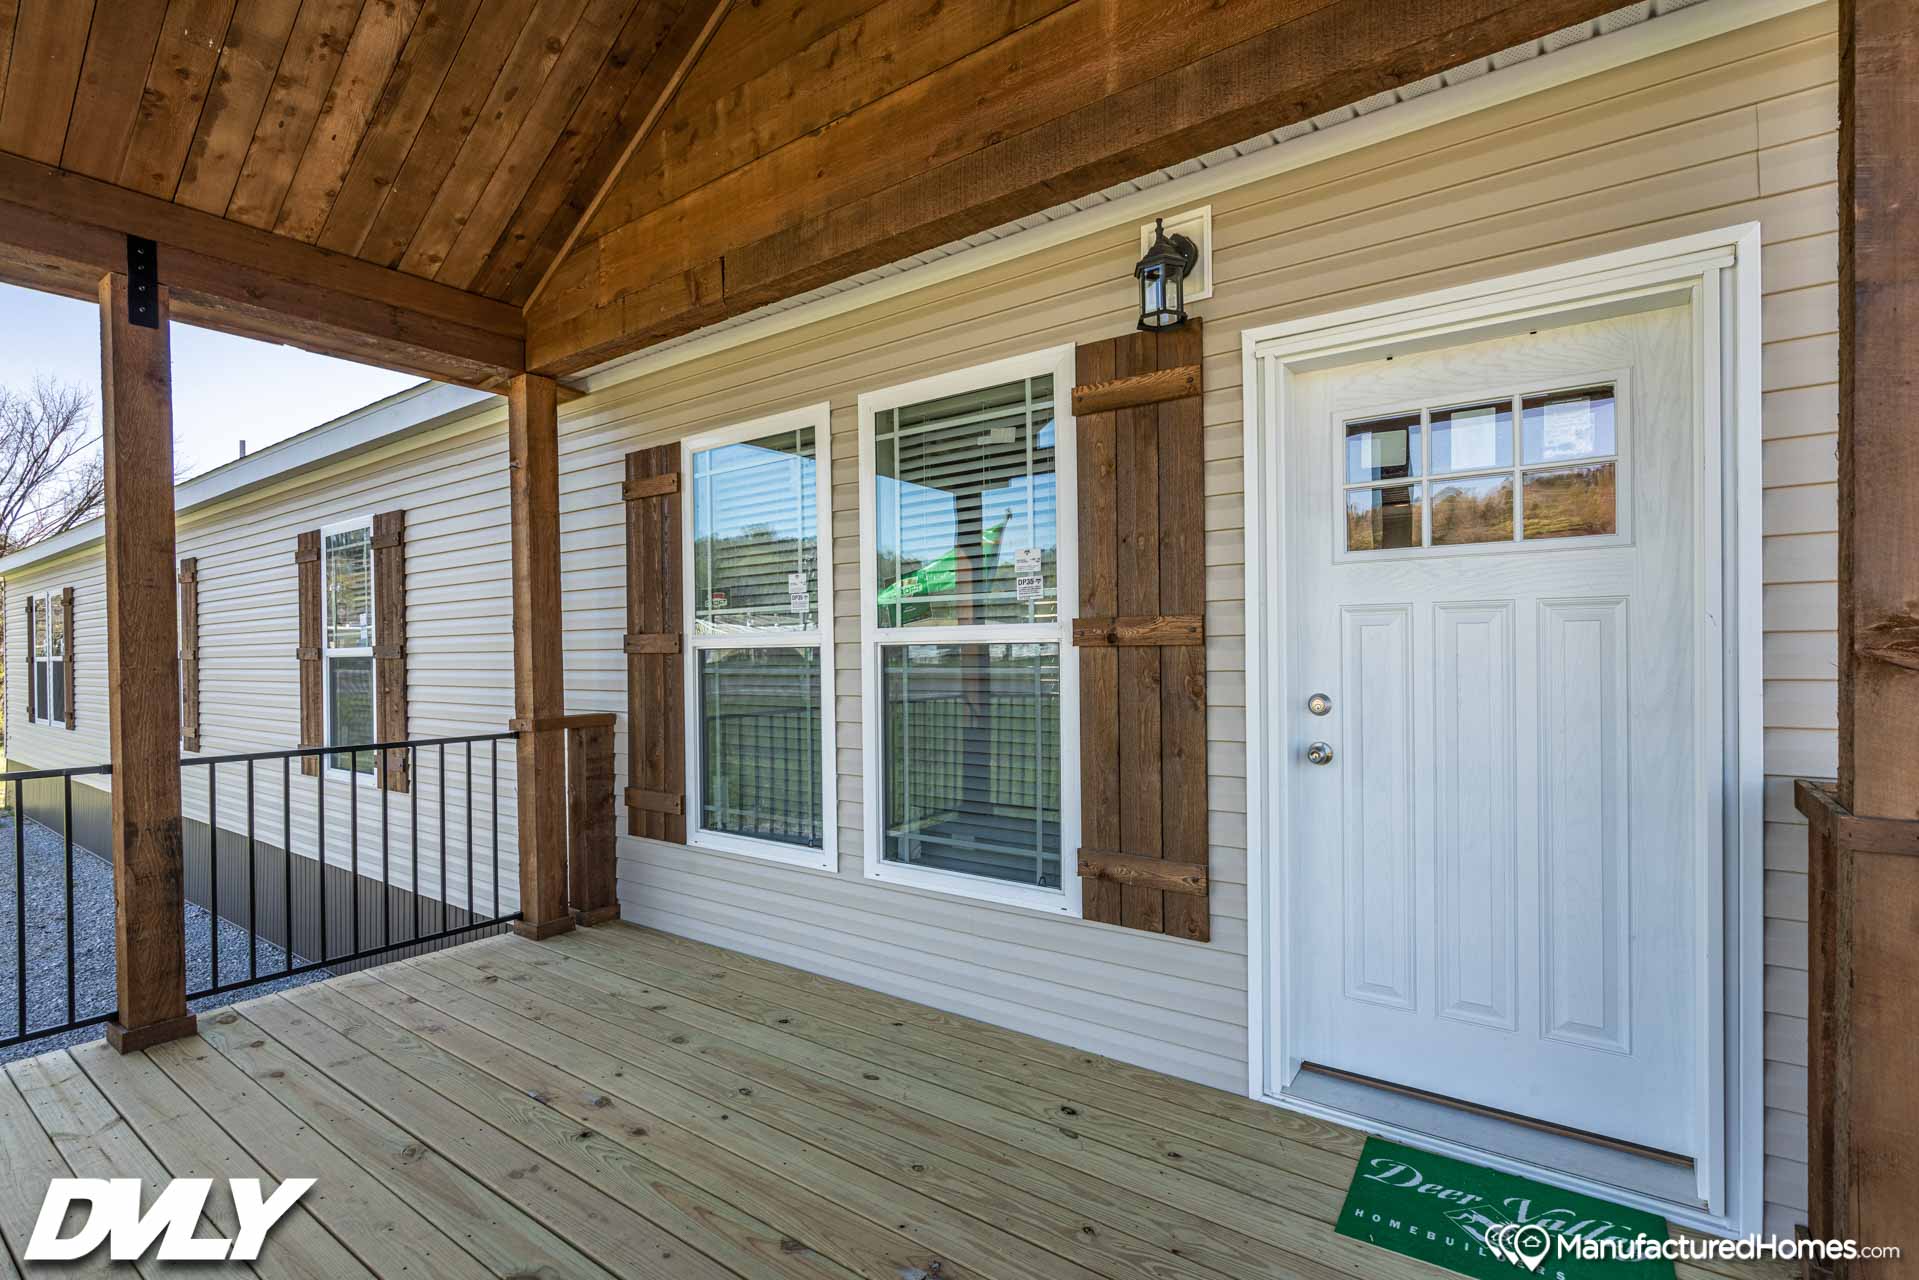 Woodland Series Orchard House Wl 9006c Porch Built By Deer Valley Homebuilders